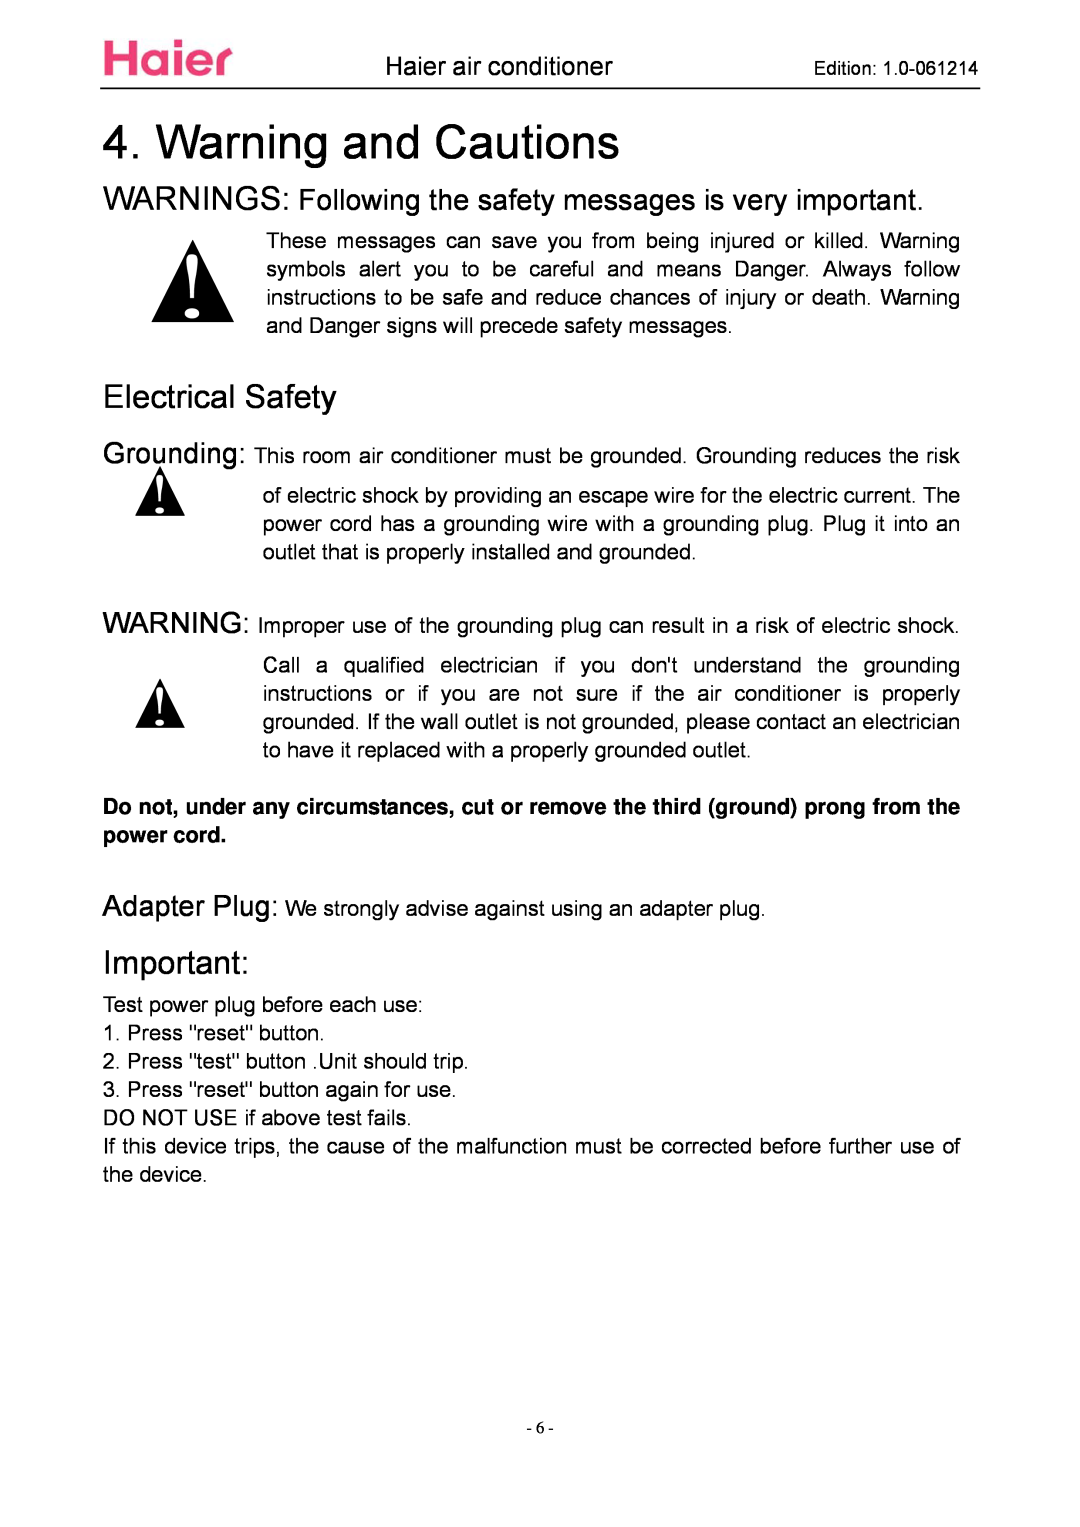 Haier ESA3087 service manual Warning and Cautions, Electrical Safety, Haier air conditioner 